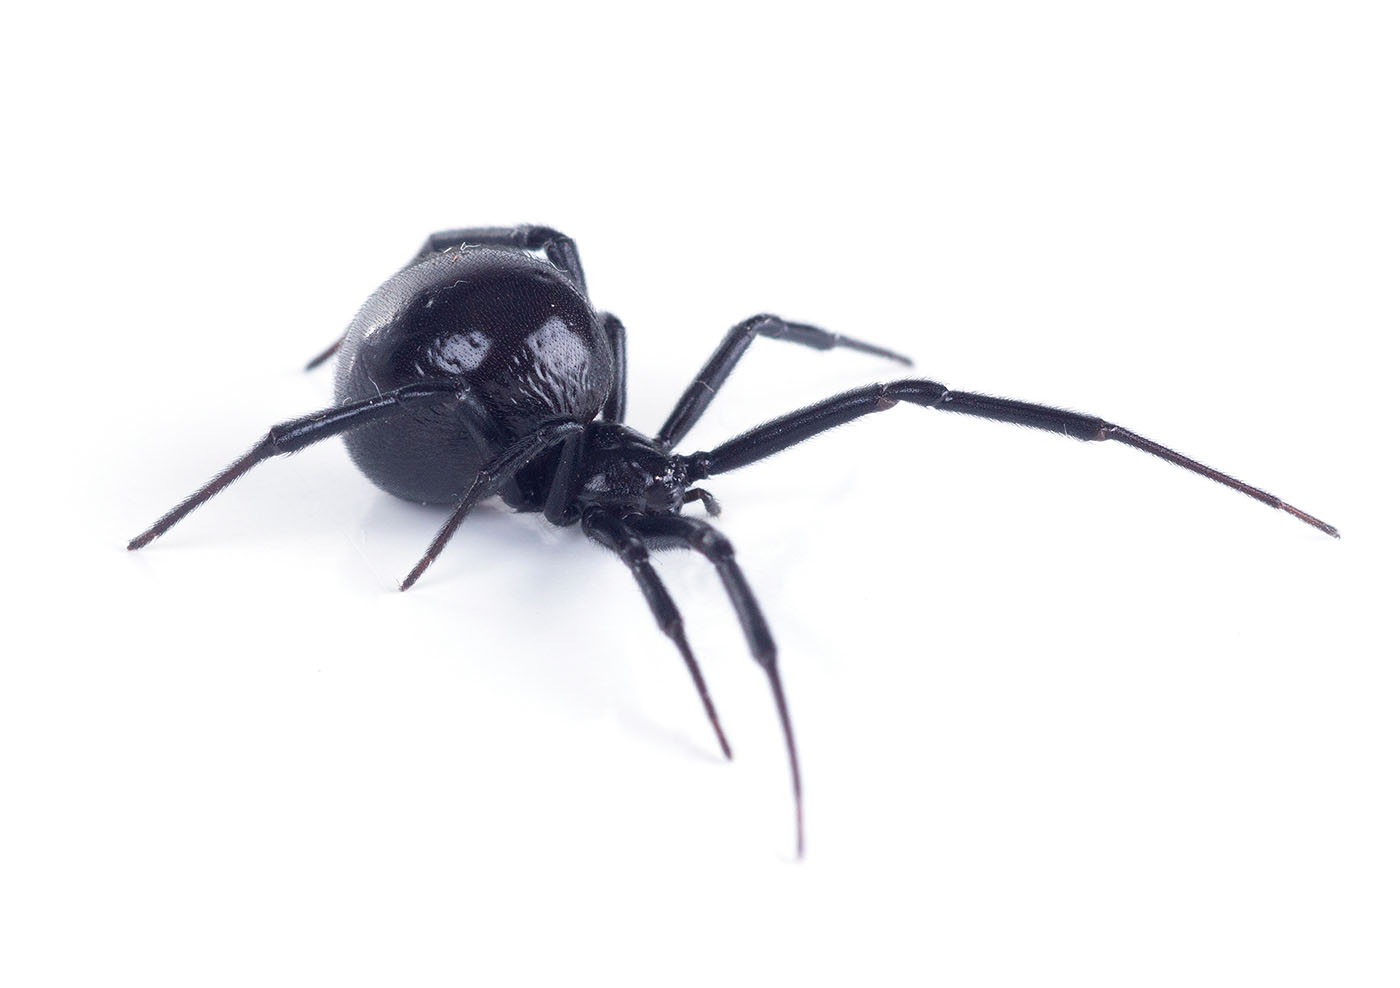 A black spider - contact GGA Pest Management Killeen for expert spider identification.